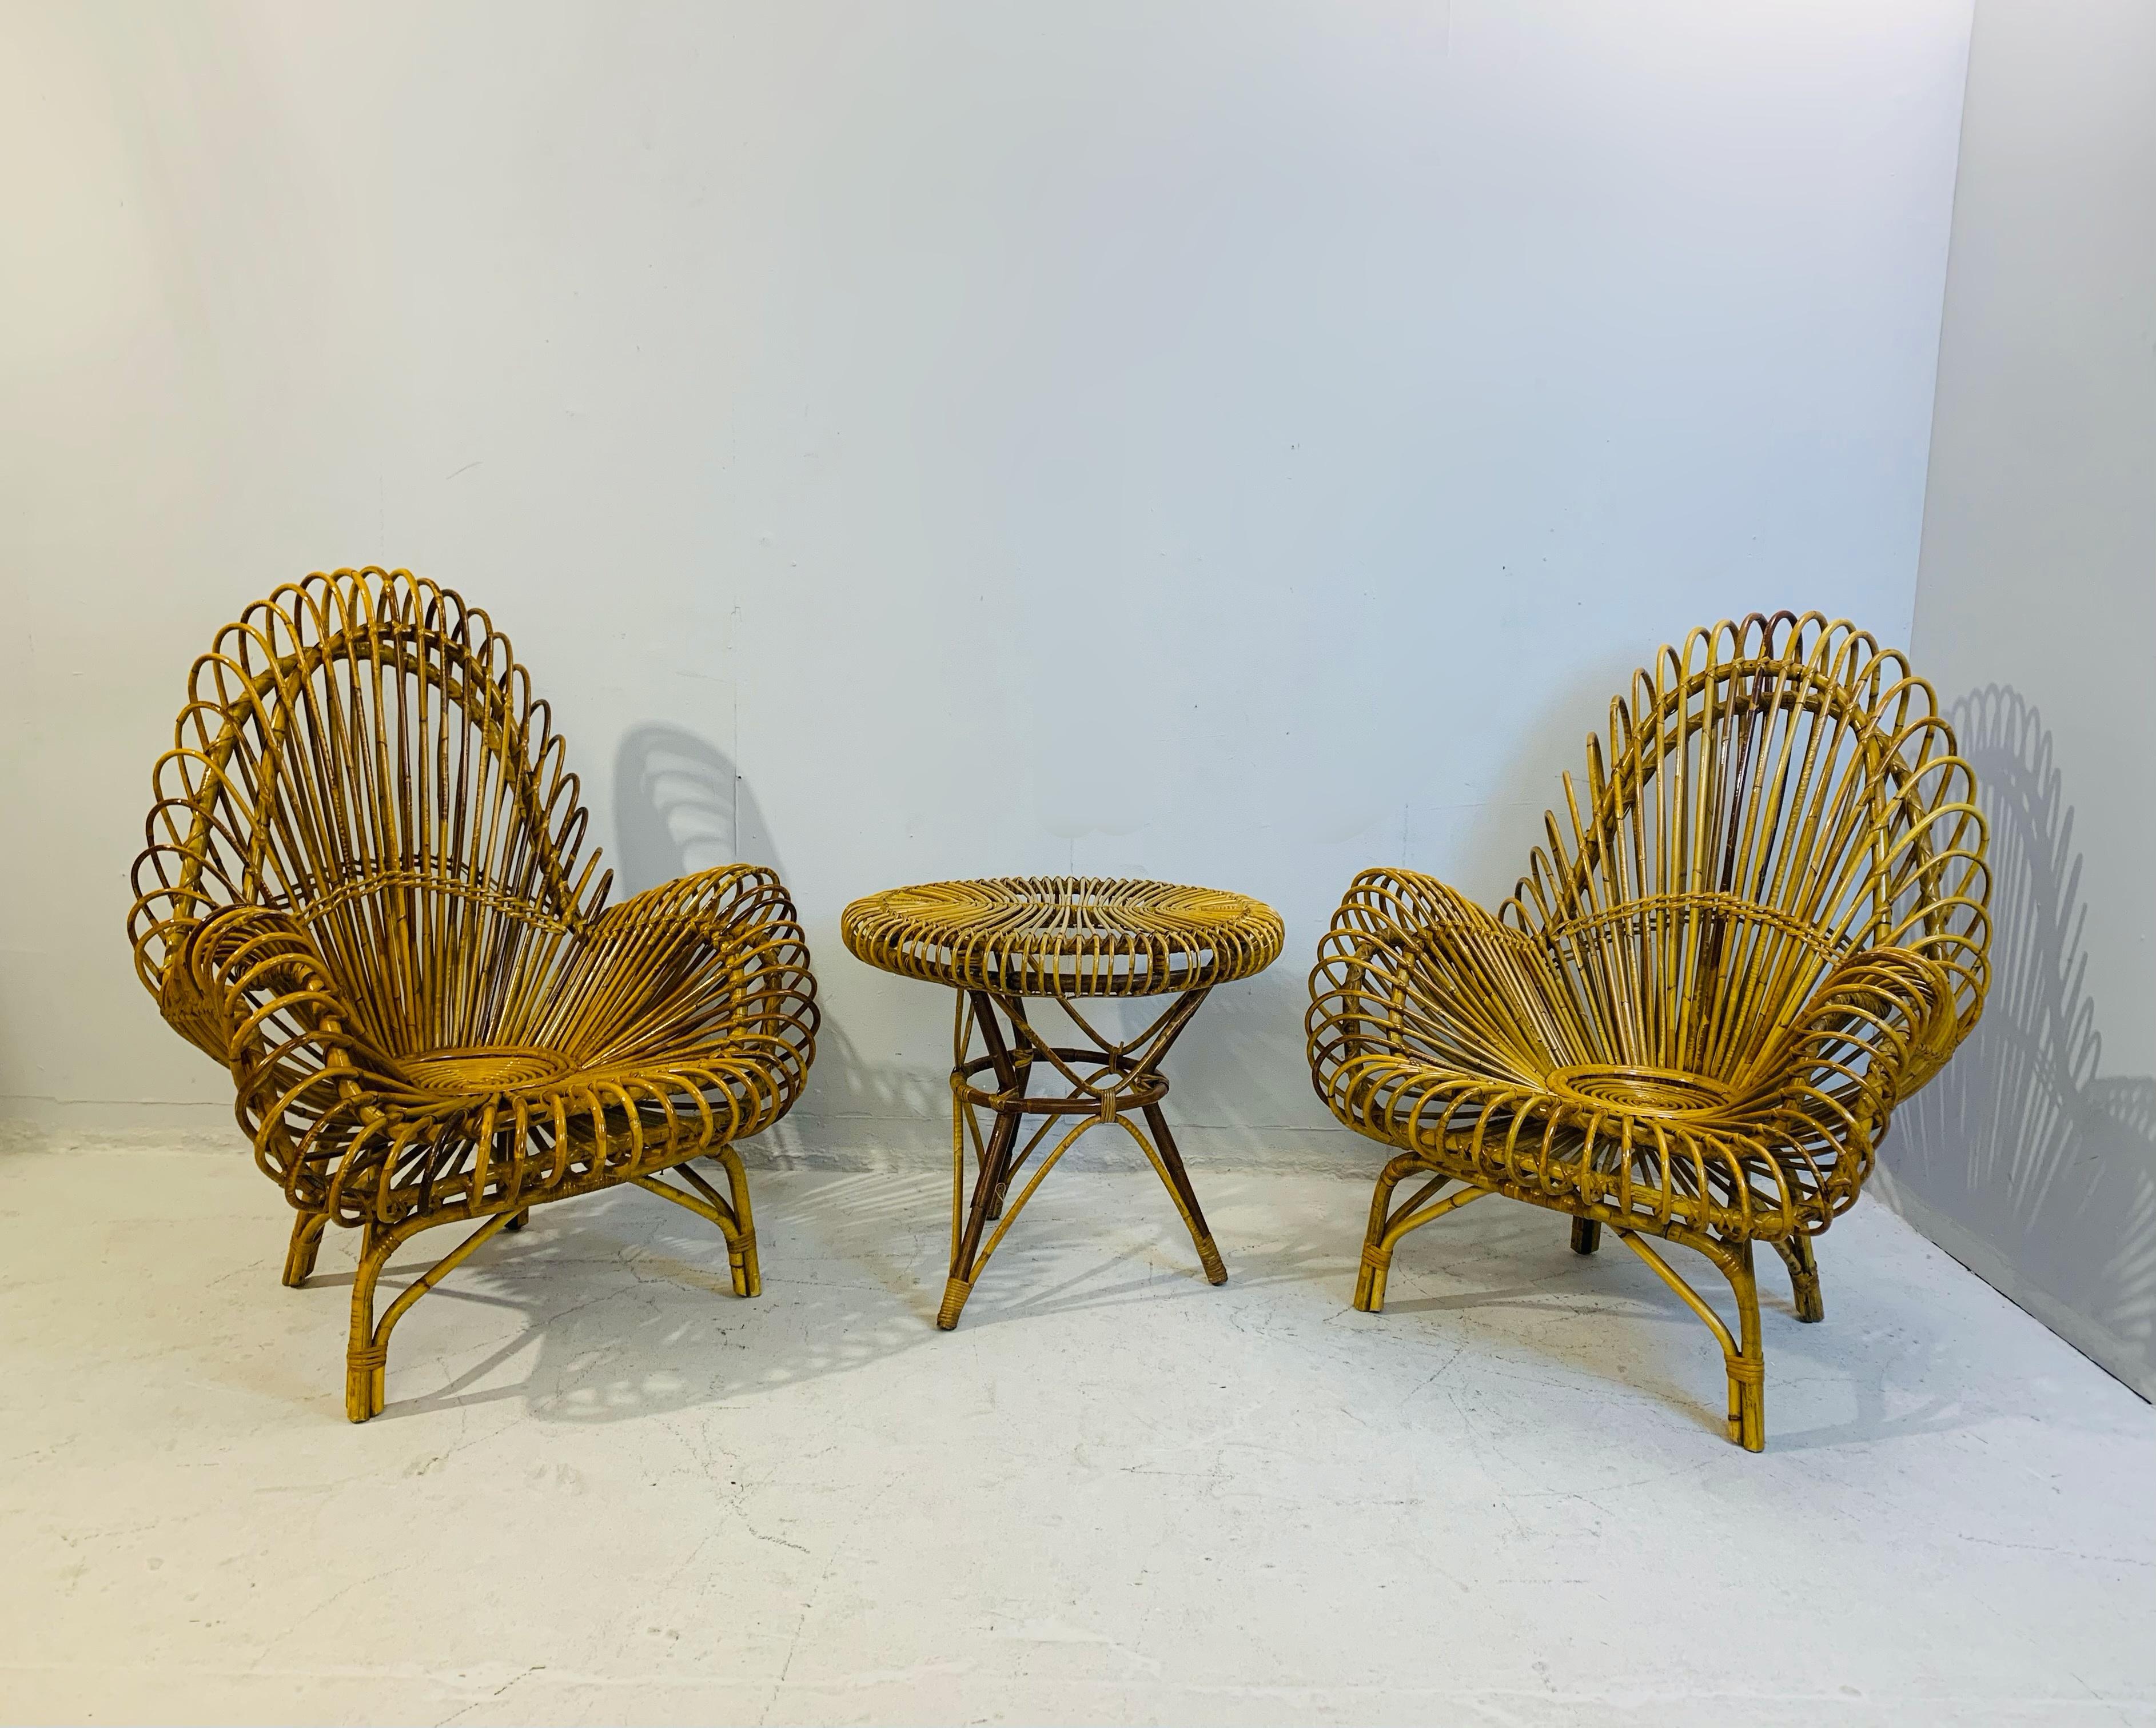 Rattan set: 2 armchairs and 1 table.
Dimensions:
- Armchair 105 x 66 x 81cm
- Table 68 x 58cm.